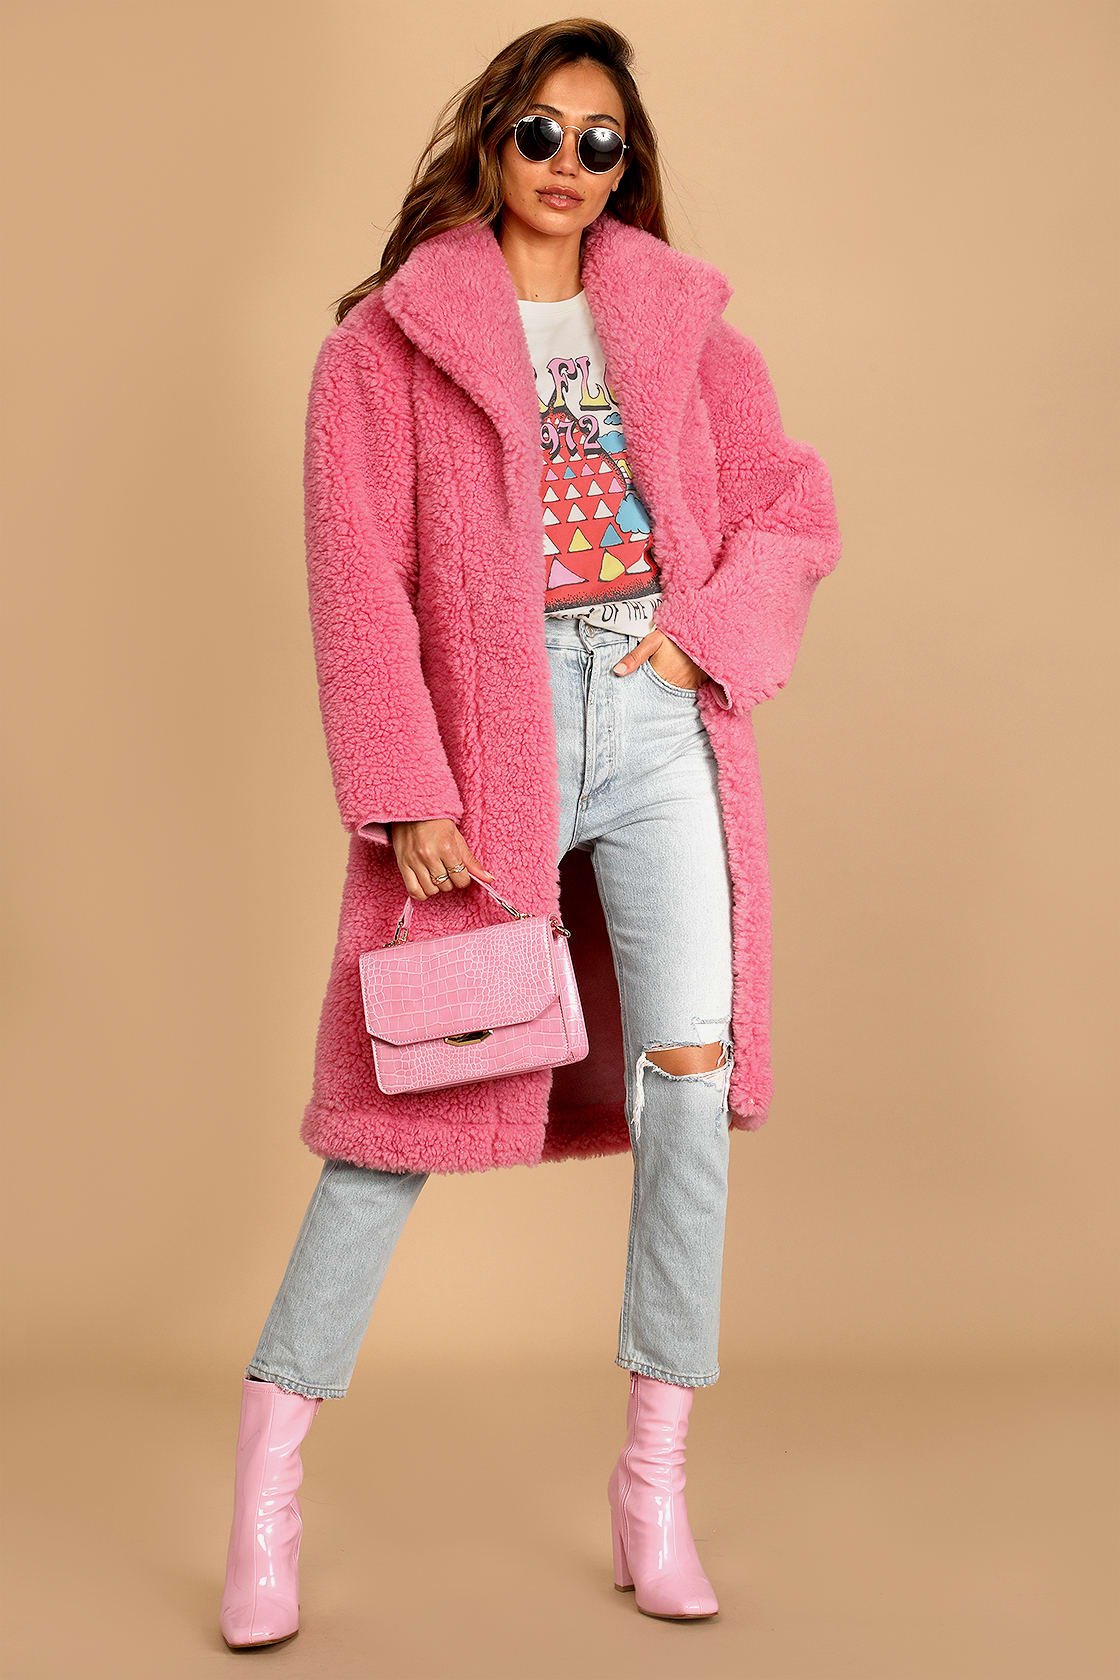 Too Fab For You Pink Faux Fur Coat